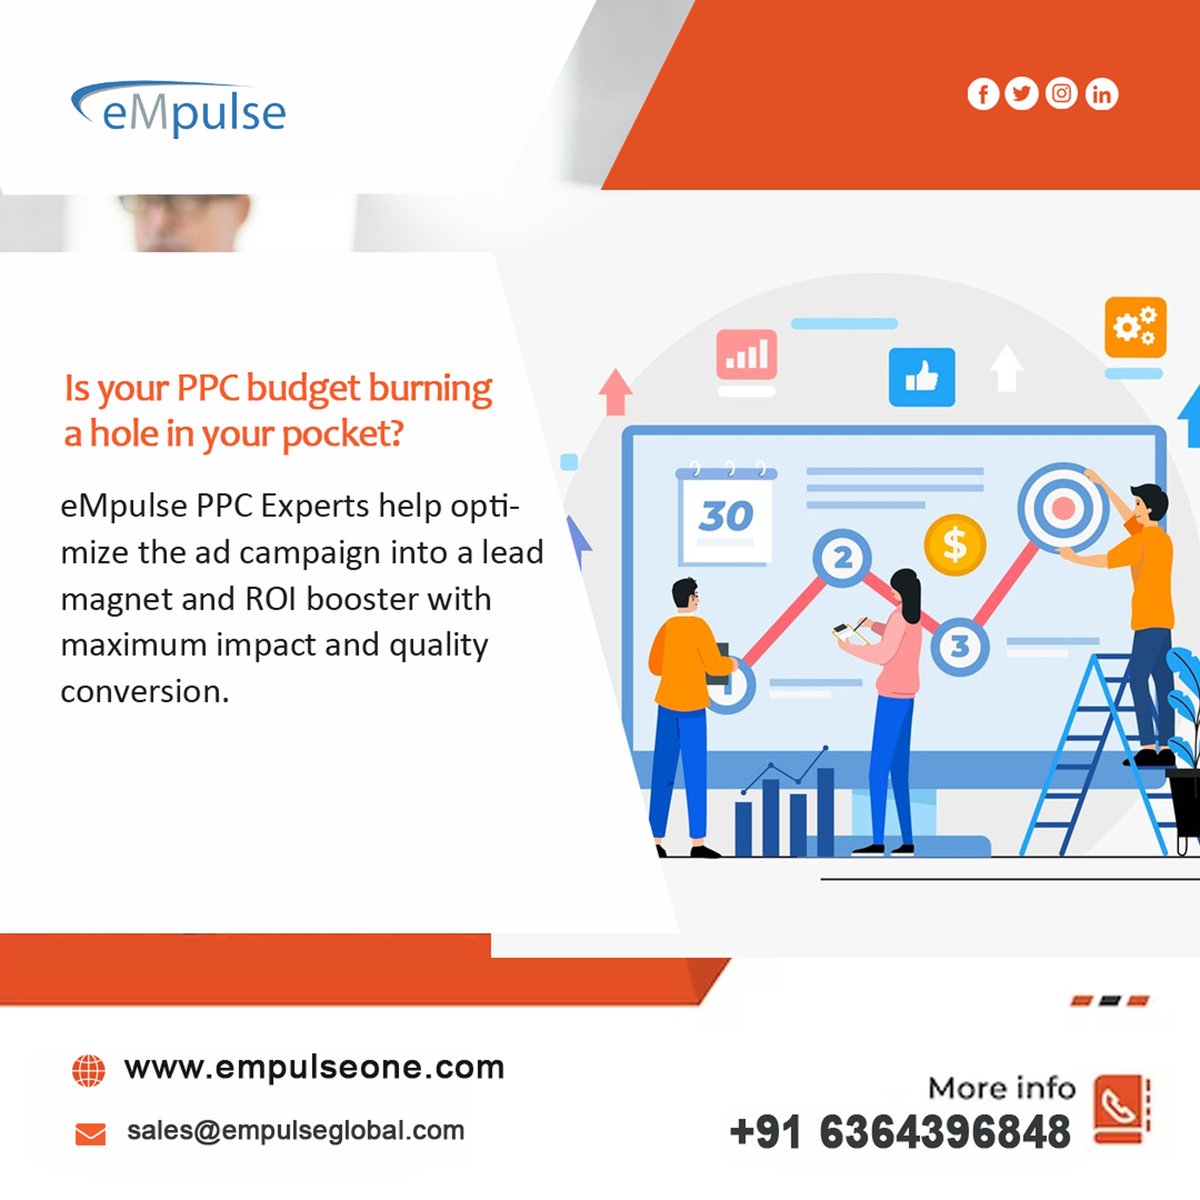 Is your PPC budget burning a hole in your pocket? eMpulse PPC Experts helps optimize ad campaign into a lead magnet and ROI booster with maximum impact & quality conversion. Call: +9163643 96848 Visit: empulseglobal.com #empulseglobal #digitalmarketing #PPC #LeadMagnets